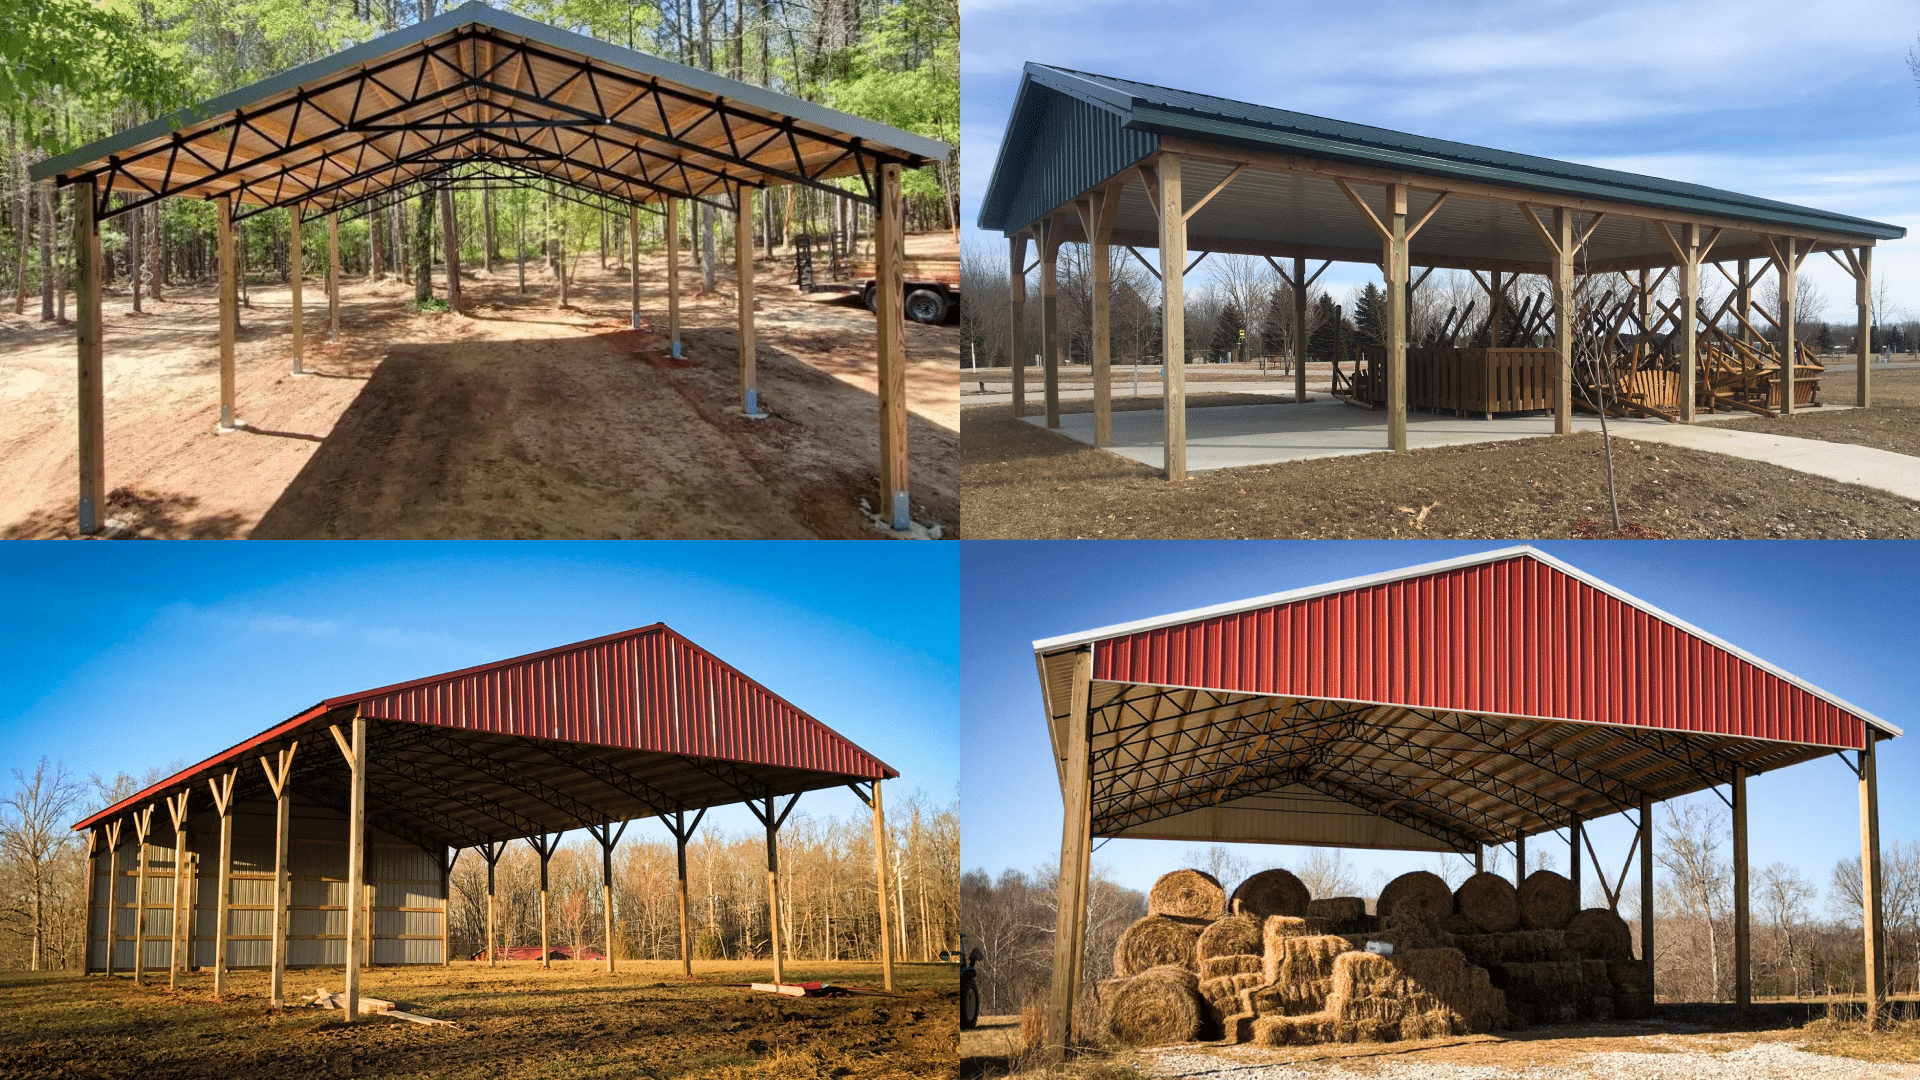 pole barn, pictures, outdoor, backyard, storage, workshop, steel roof, aluminum siding, durable, long-lasting, weather-resistant, classic design, construction, farm, agricultural, rural, spacious, versatile